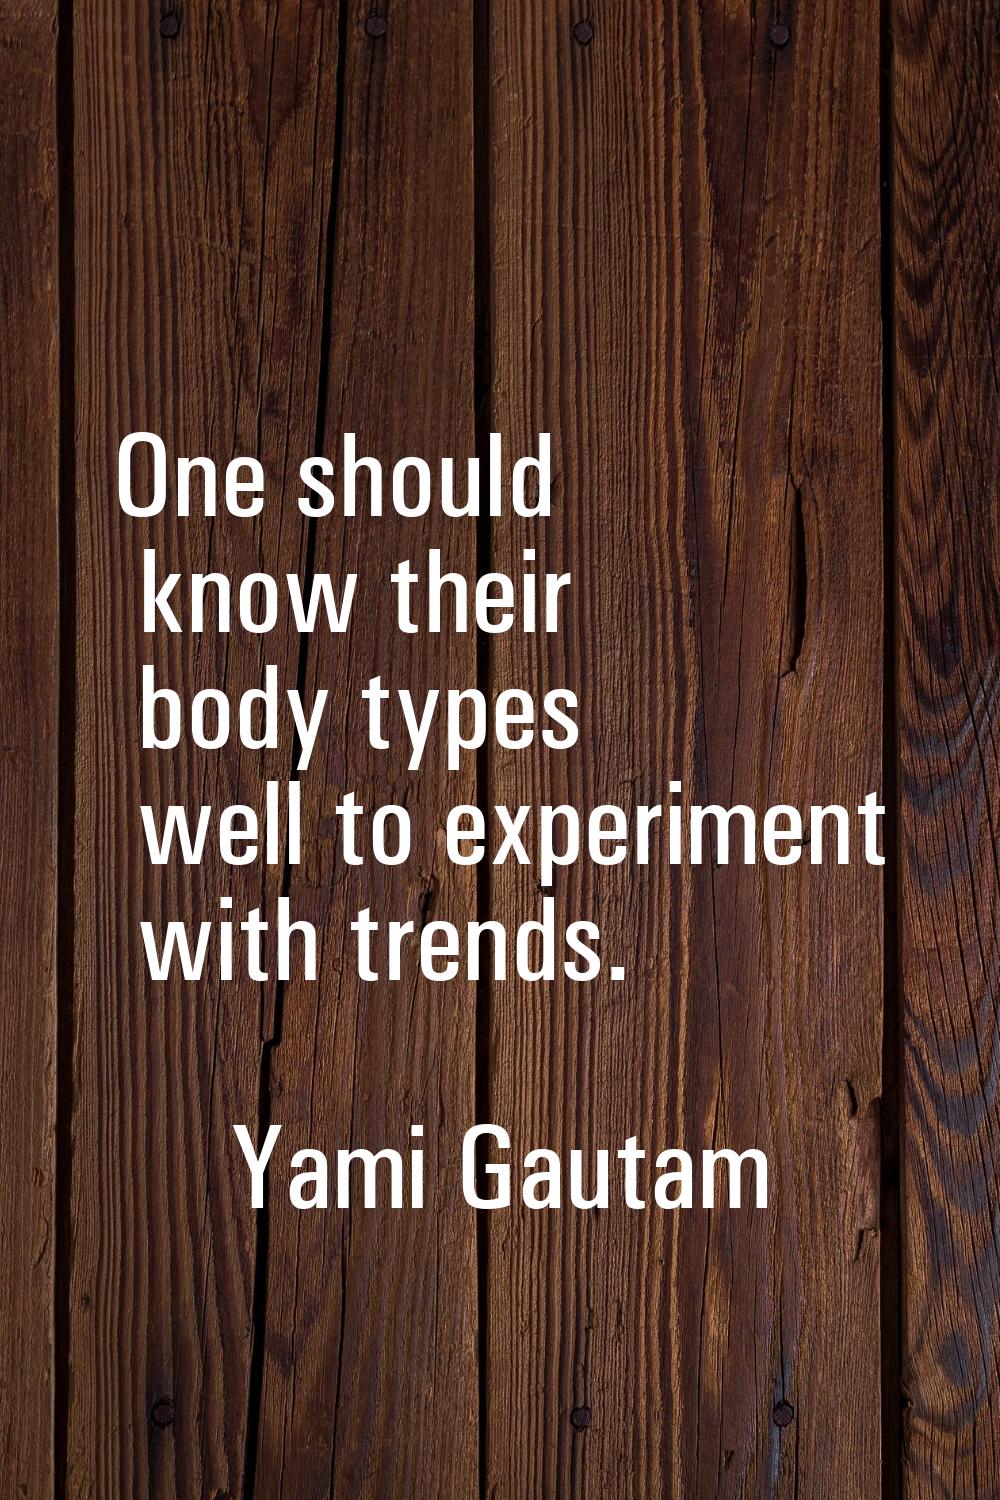 One should know their body types well to experiment with trends.